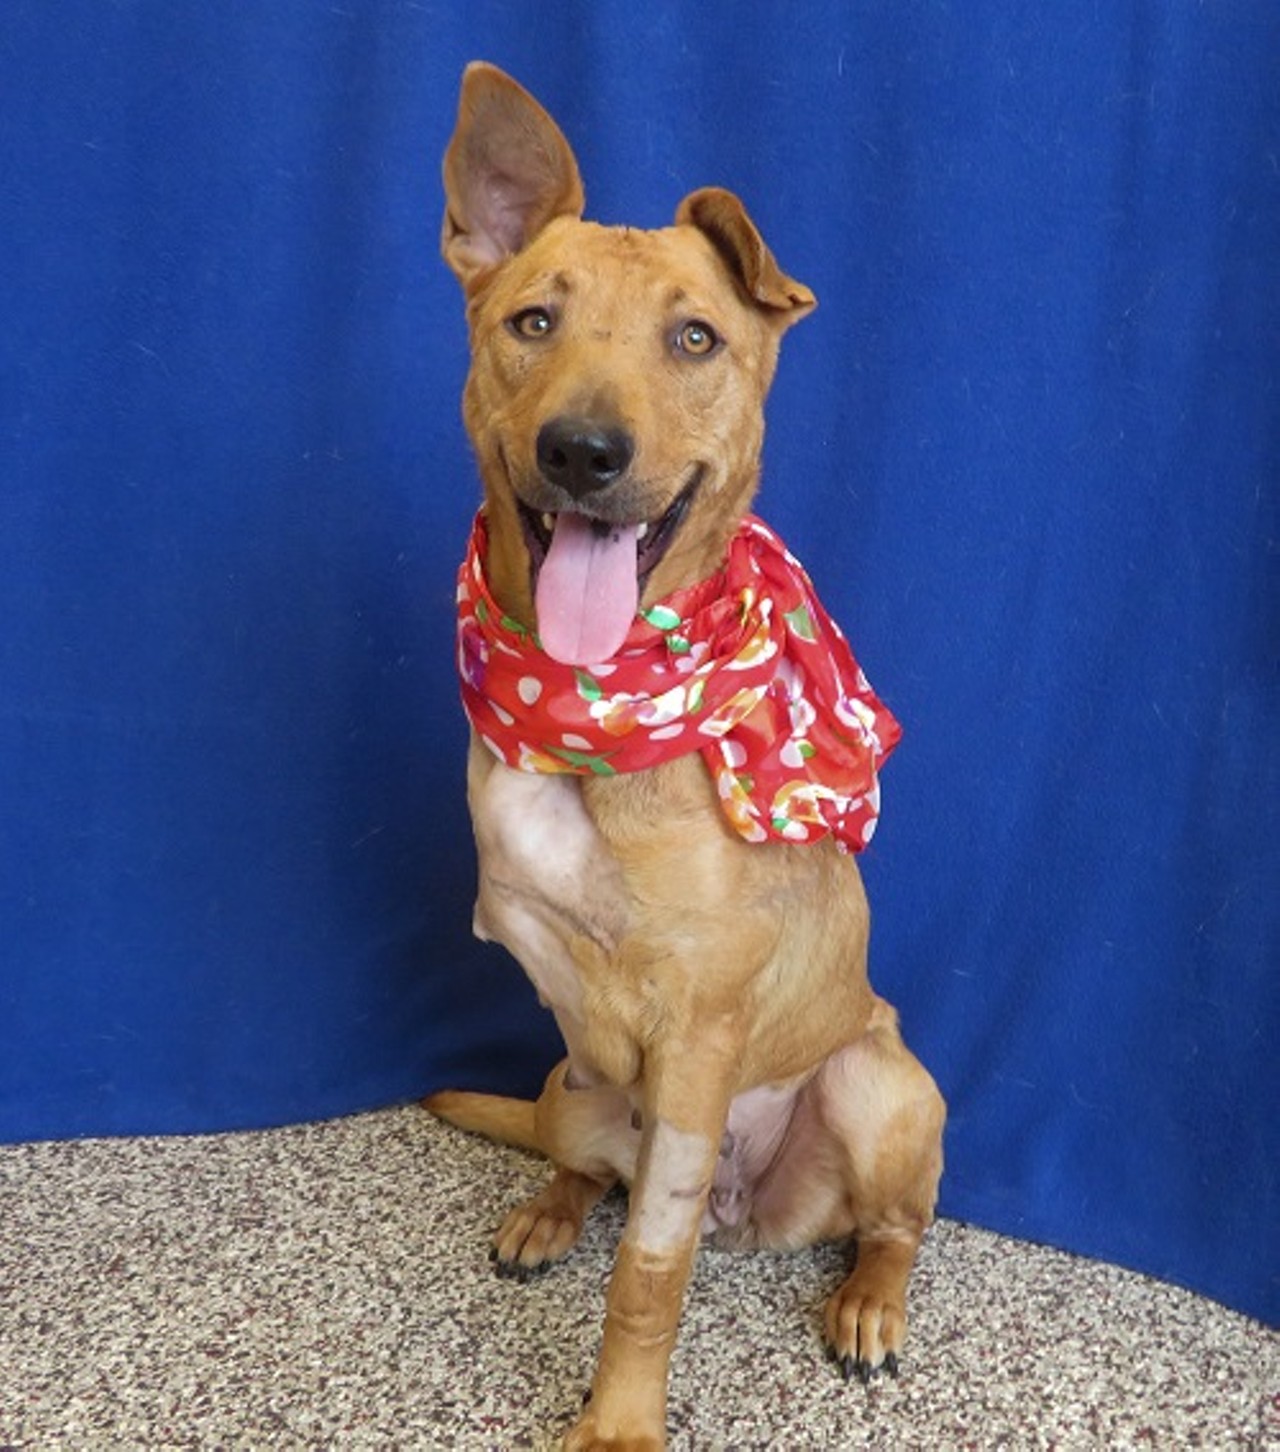 Maggie
GENDER: Female
BREED: Shepherd
AGE: 4 years, 1 month
WEIGHT: 45 pounds
SPECIAL CONSIDERATIONS: Amputee
REASON I CAME TO MHS: Homeless and injured
LOCATION: Mackey Center for Animal Care in Detroit
ID NUMBER: 858130